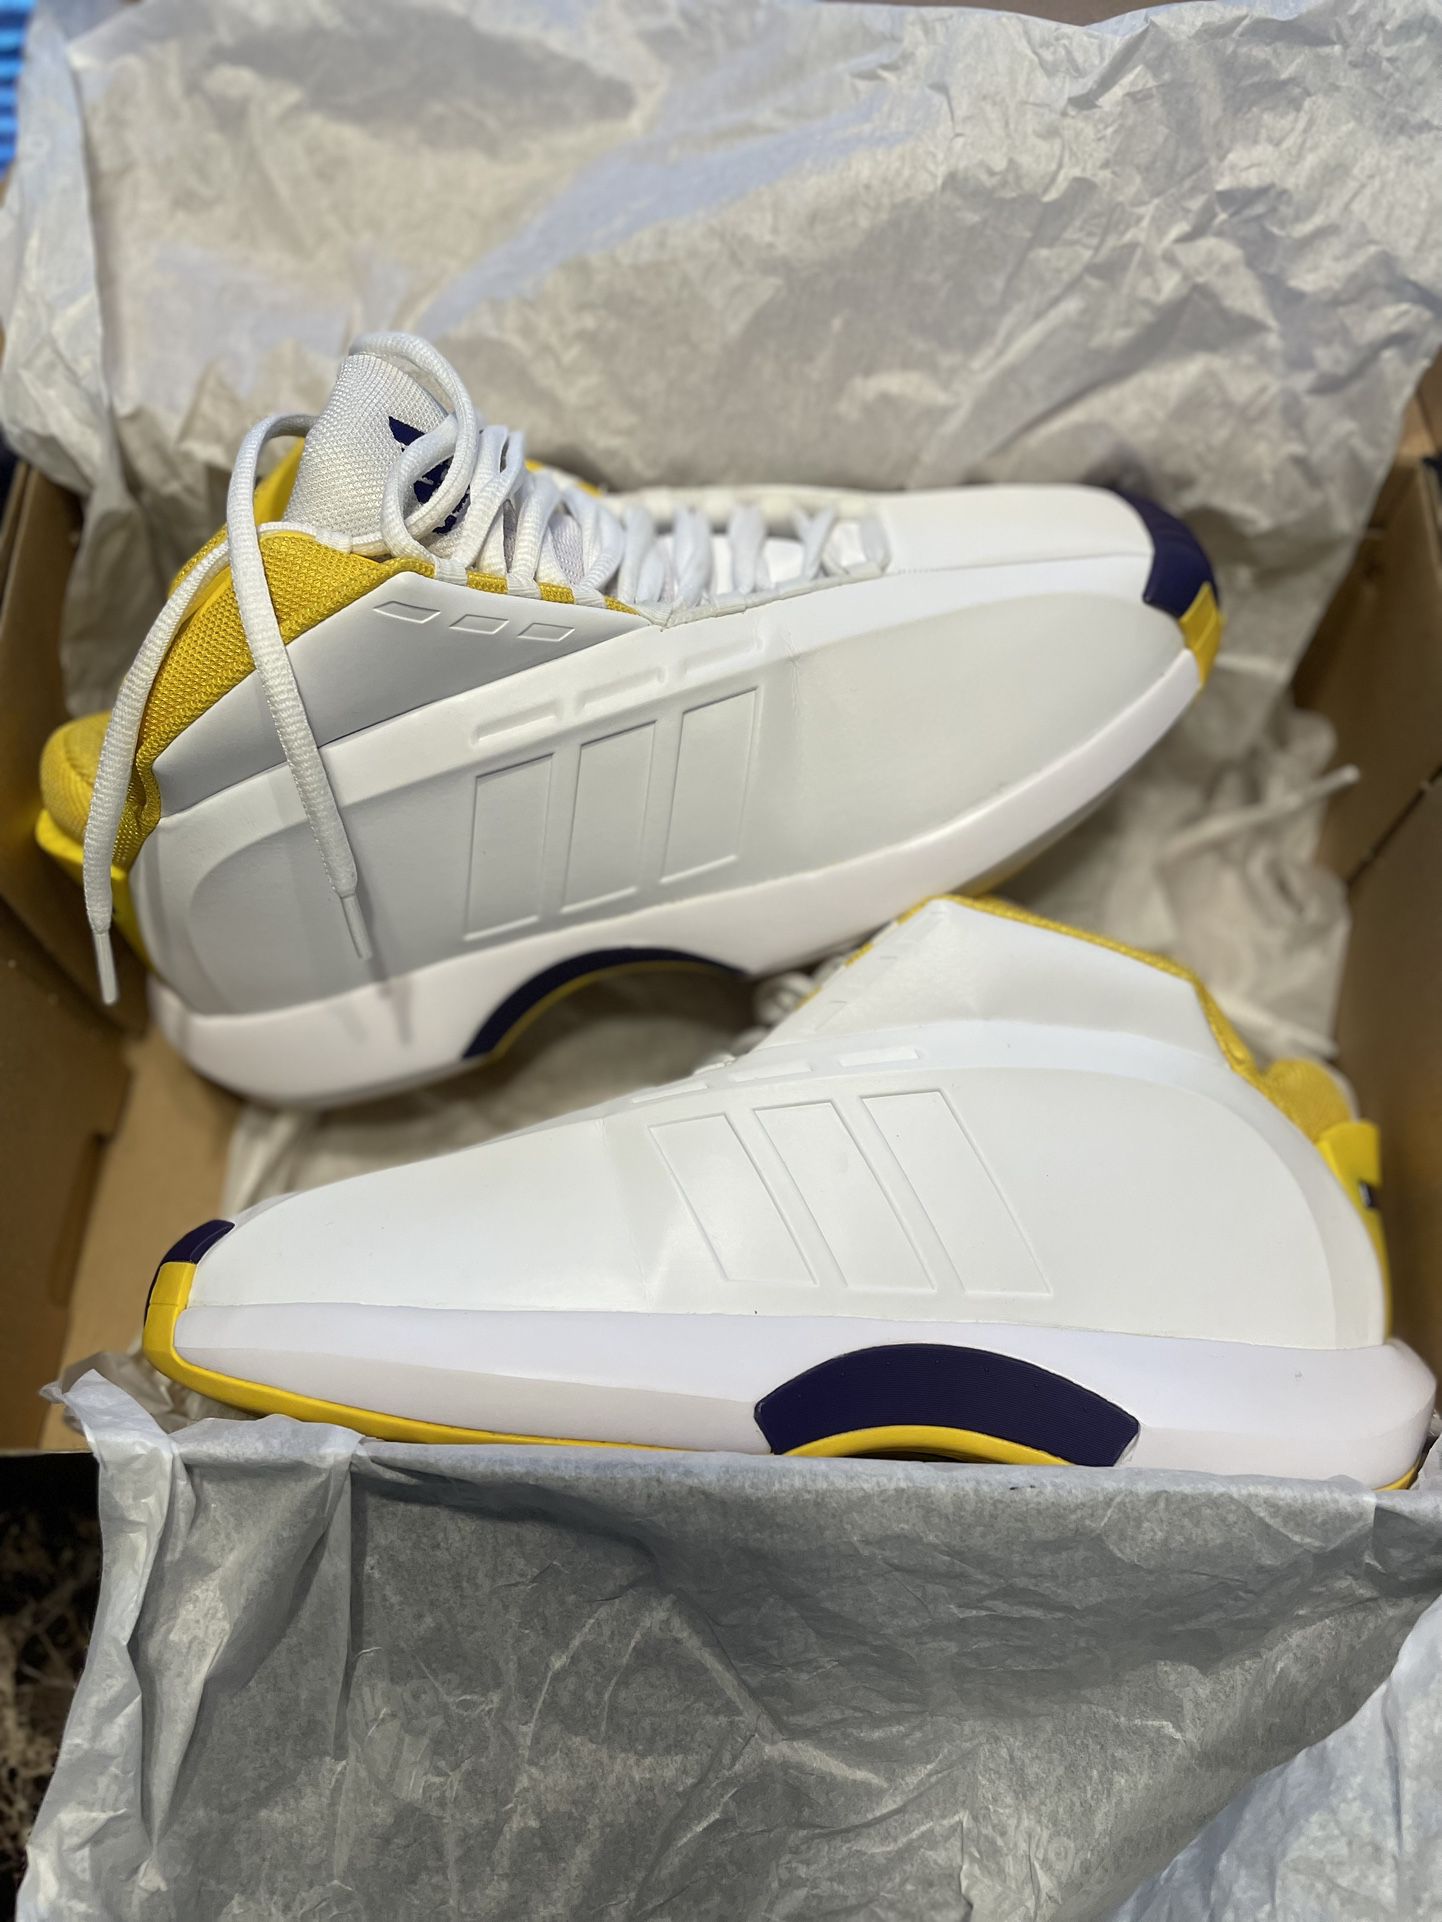 ADIDAS CRAZY 1 2022 LAKERS HOME Size 11.5s MENS / 13 WOMENS